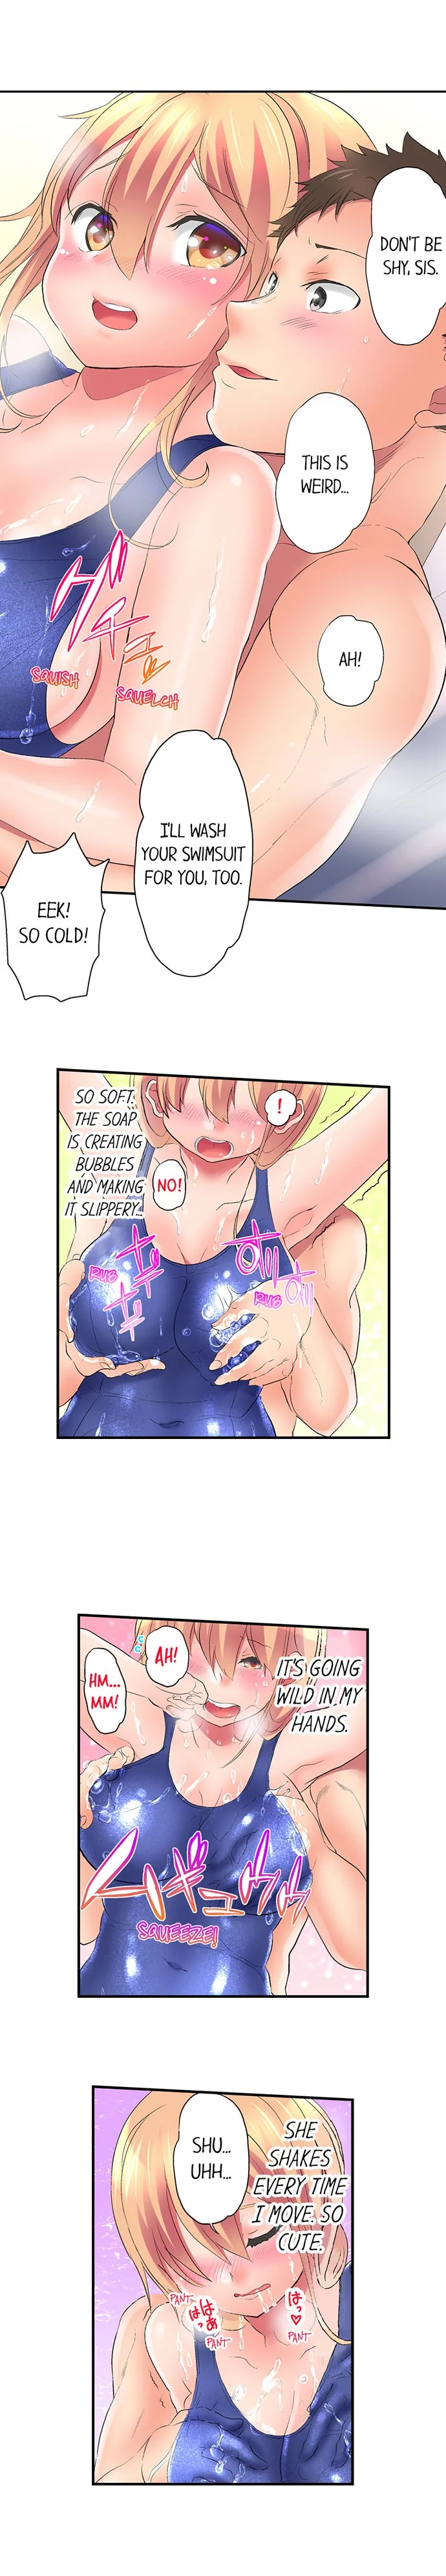 Big Sister Lets Me Bang Her! - Chapter 5 Page 5